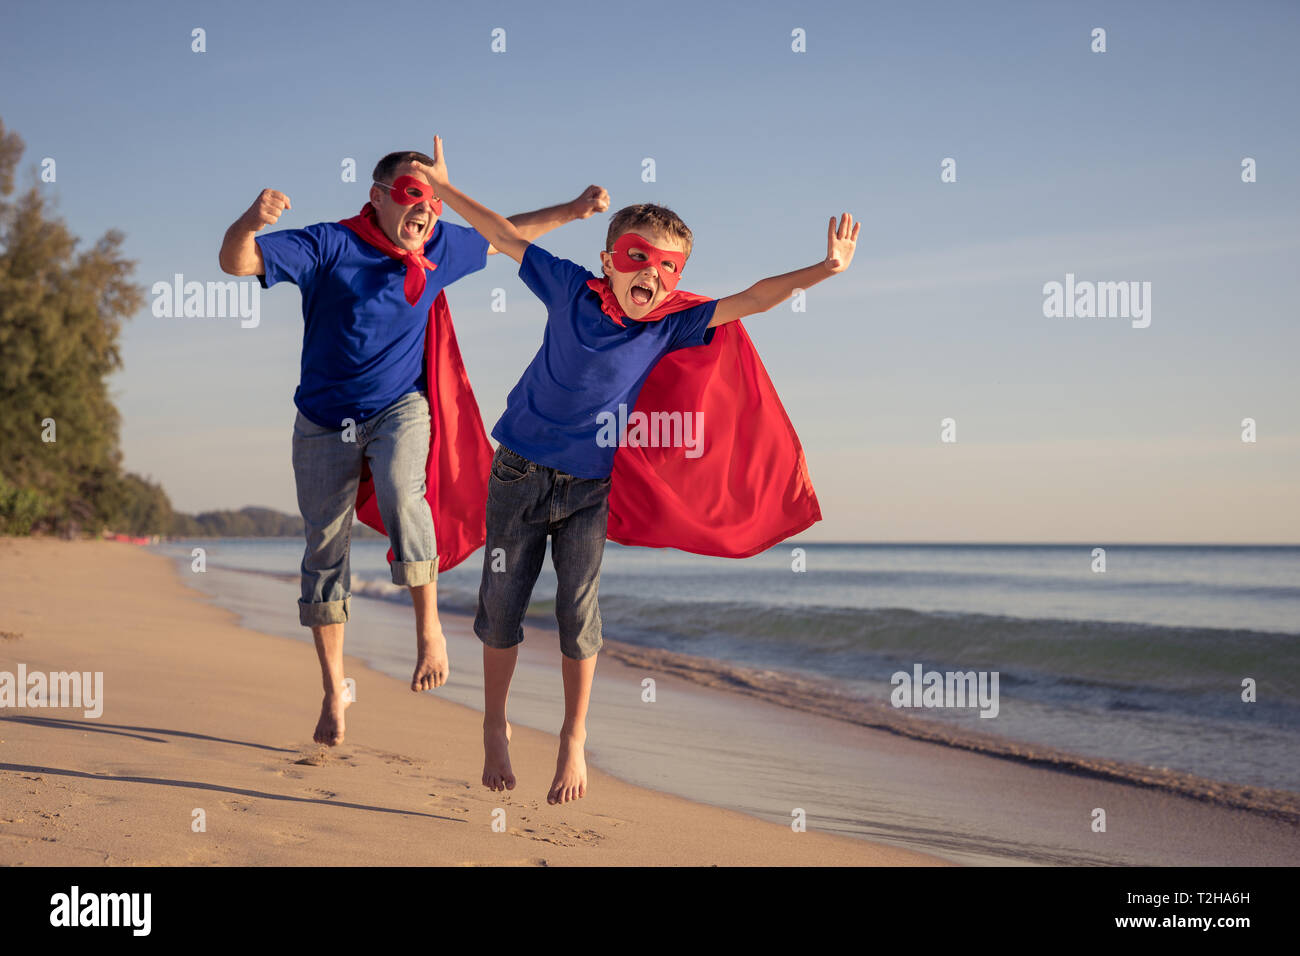 Father and son playing superhero on the beach at the day time. People having fun outdoors. Concept of summer vacation and friendly family. Stock Photo